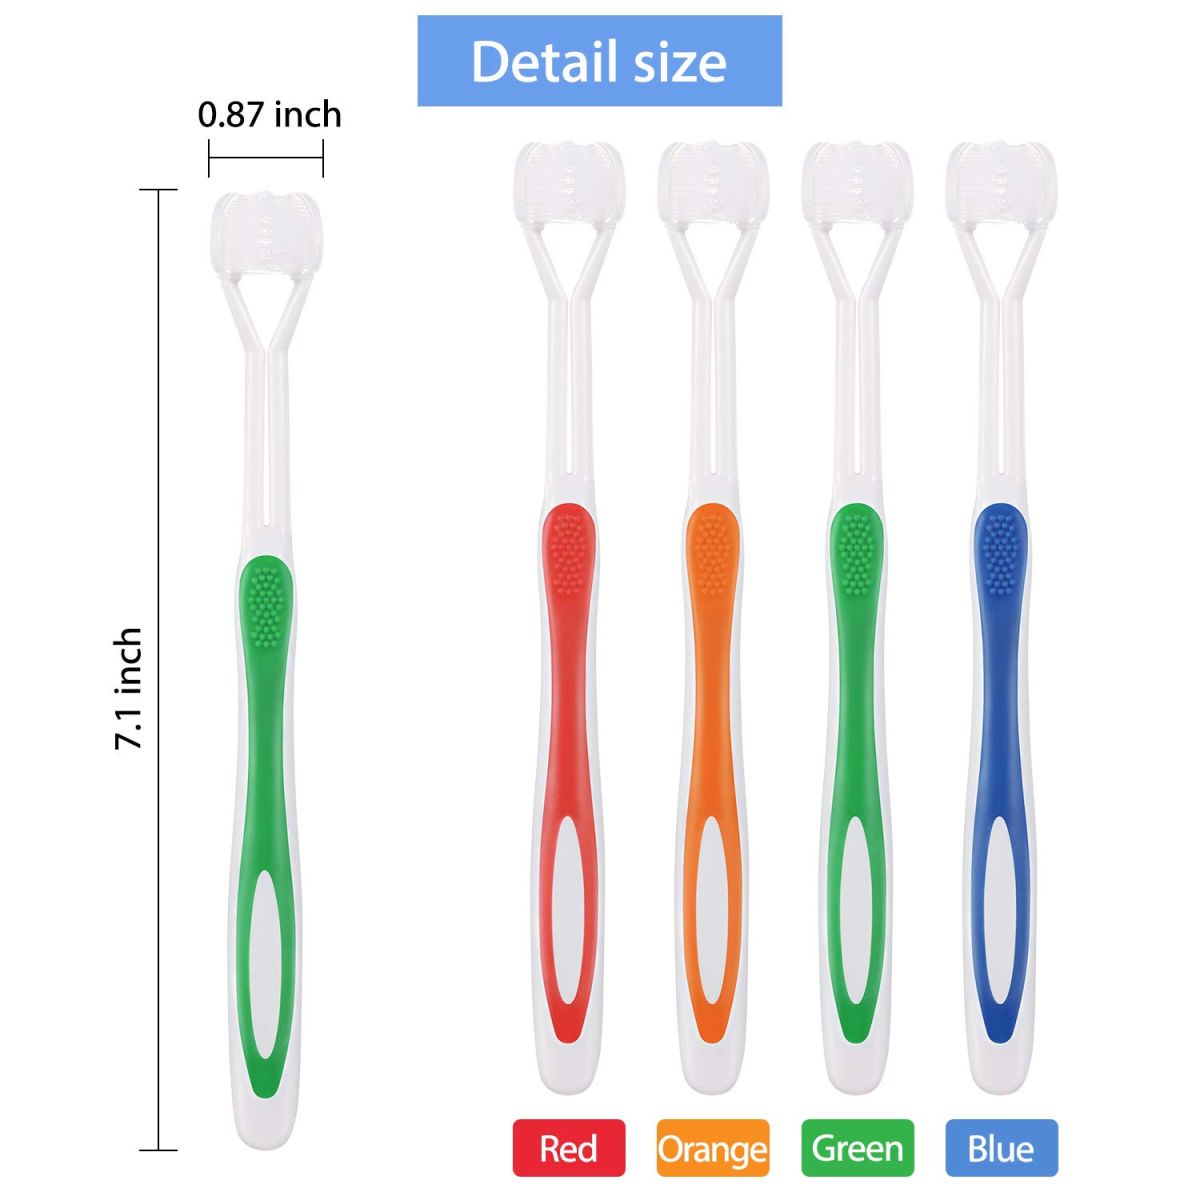 4 Pieces Three Sided Toothbrush Autism Sensory Toothbrush Bristle Travel Toothbrush for Kids Complete Teeth Gum Care Pretty Good Angle Clean Each Tooth, Soft and Gentle (Green, Blue, Yellow, Red)